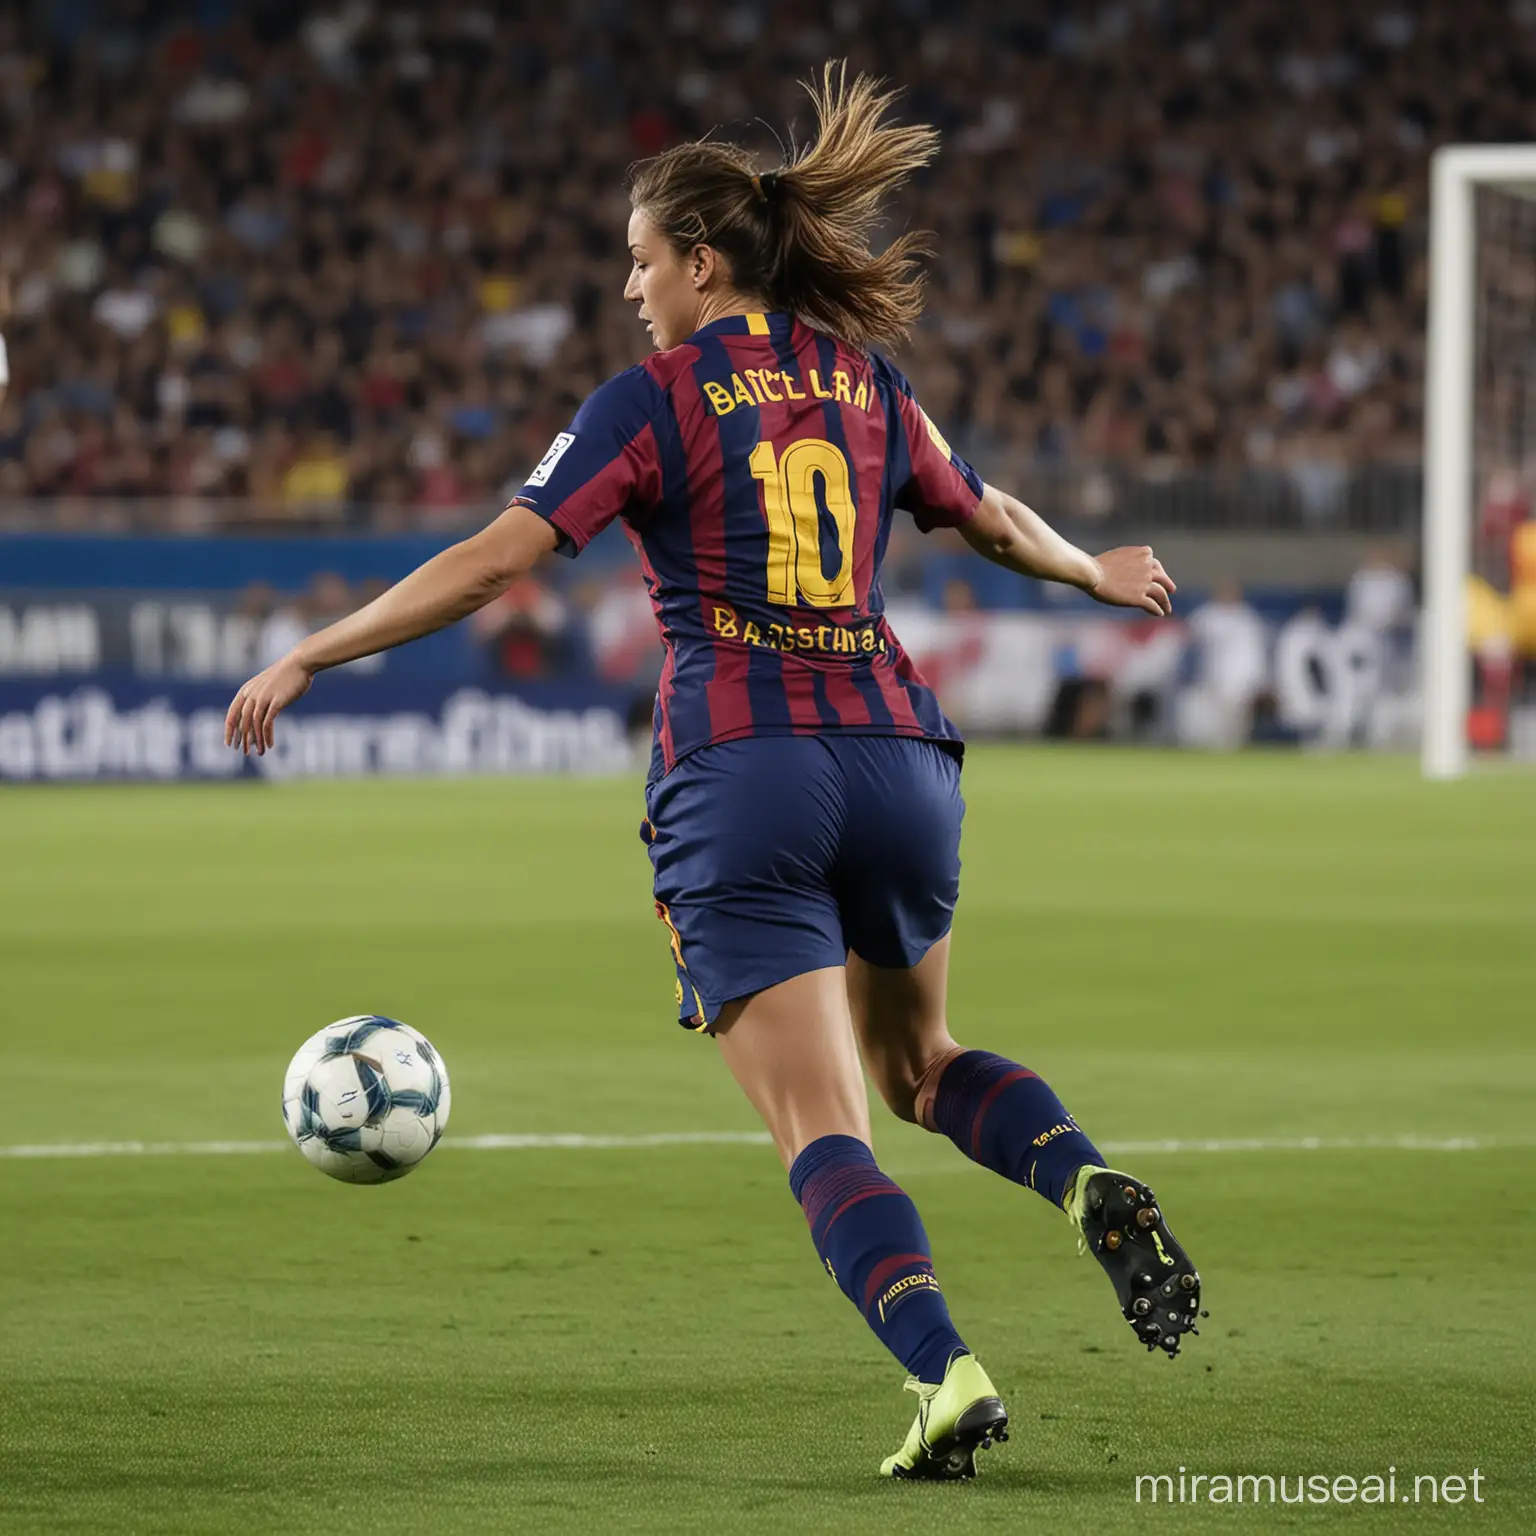 Back of female Barcelona player kicking football in action